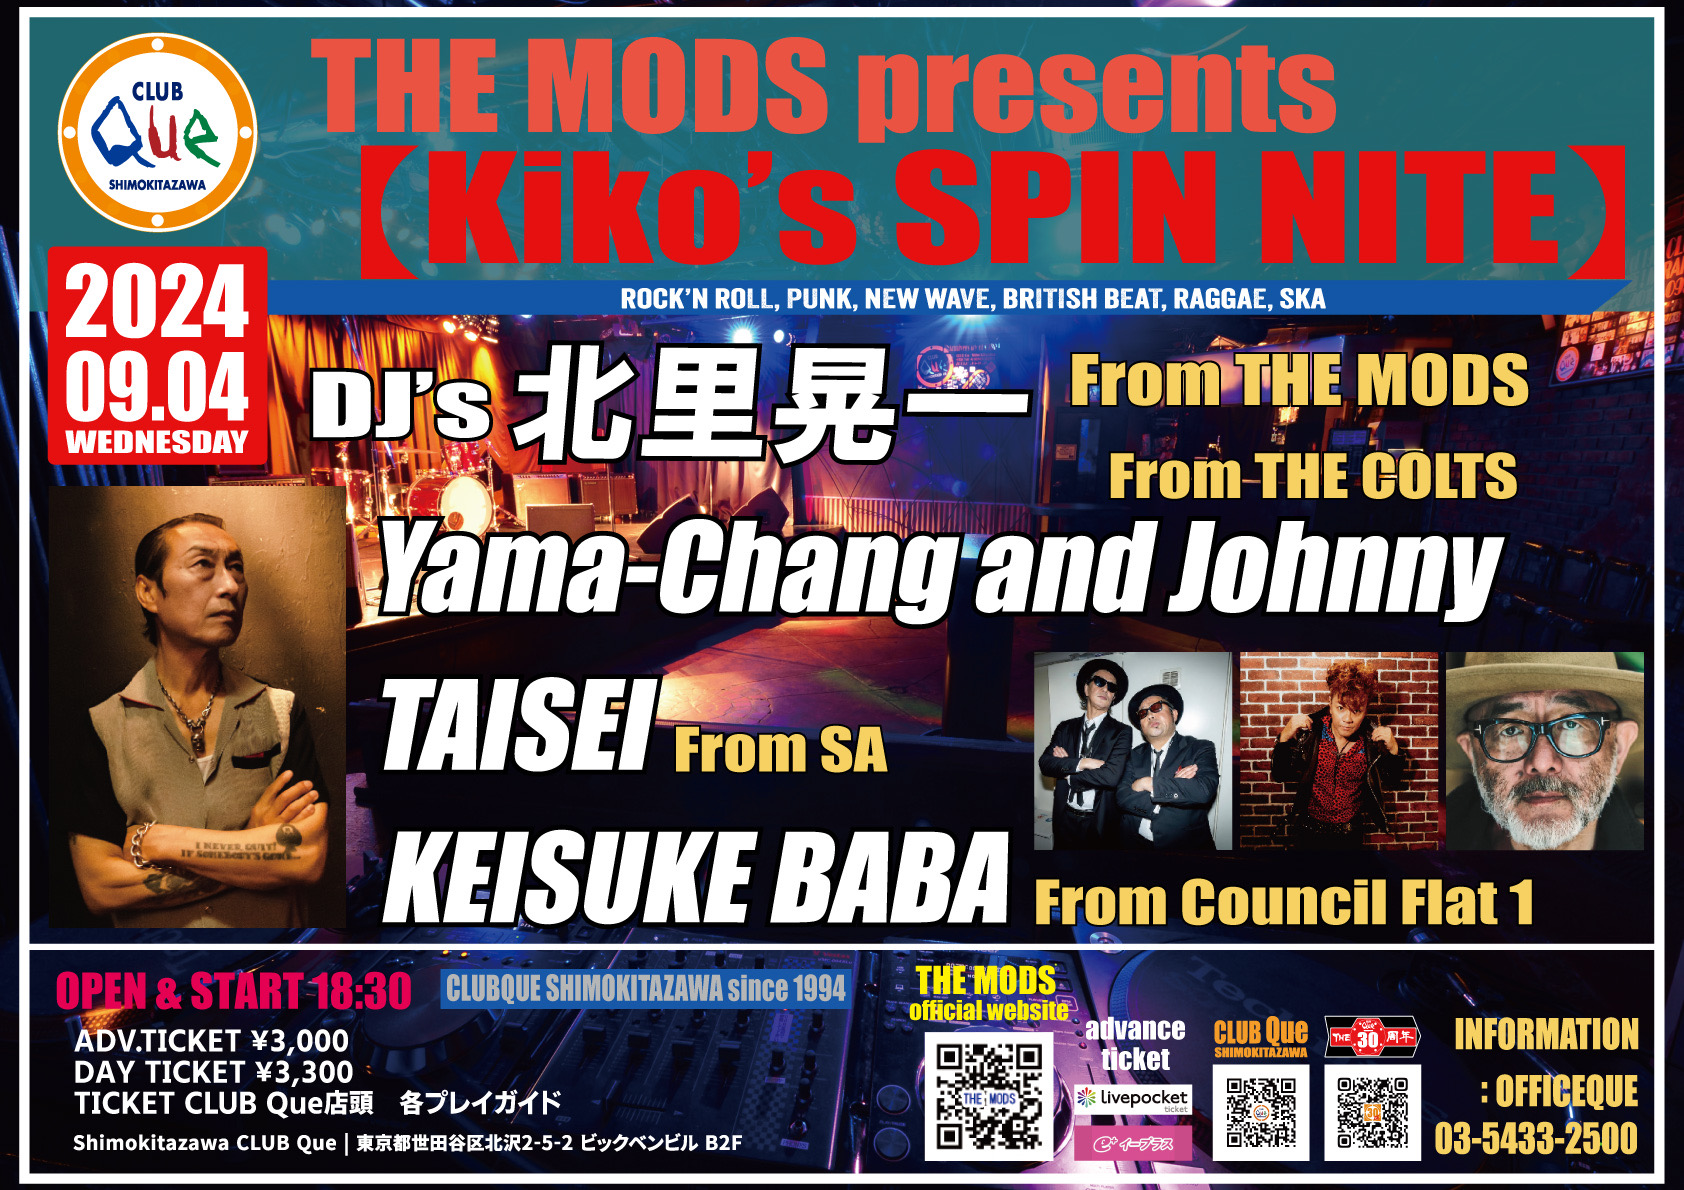 THE MODS presents【Kiko's SPIN NITE】 ｜ THE MODS OFFICIAL SITE